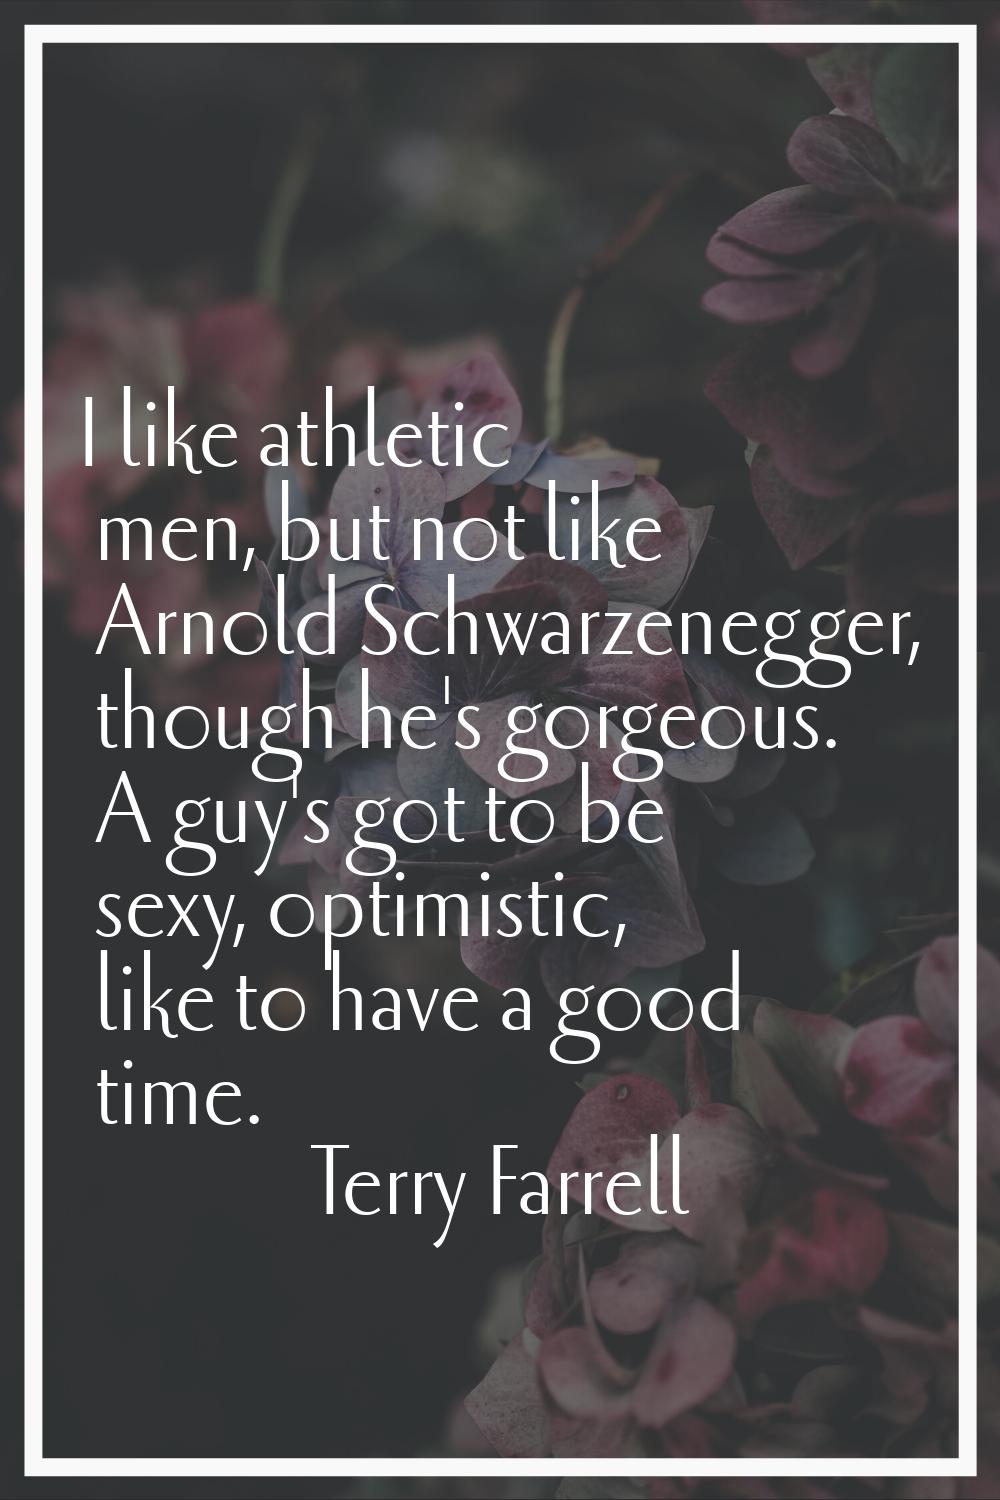 I like athletic men, but not like Arnold Schwarzenegger, though he's gorgeous. A guy's got to be se